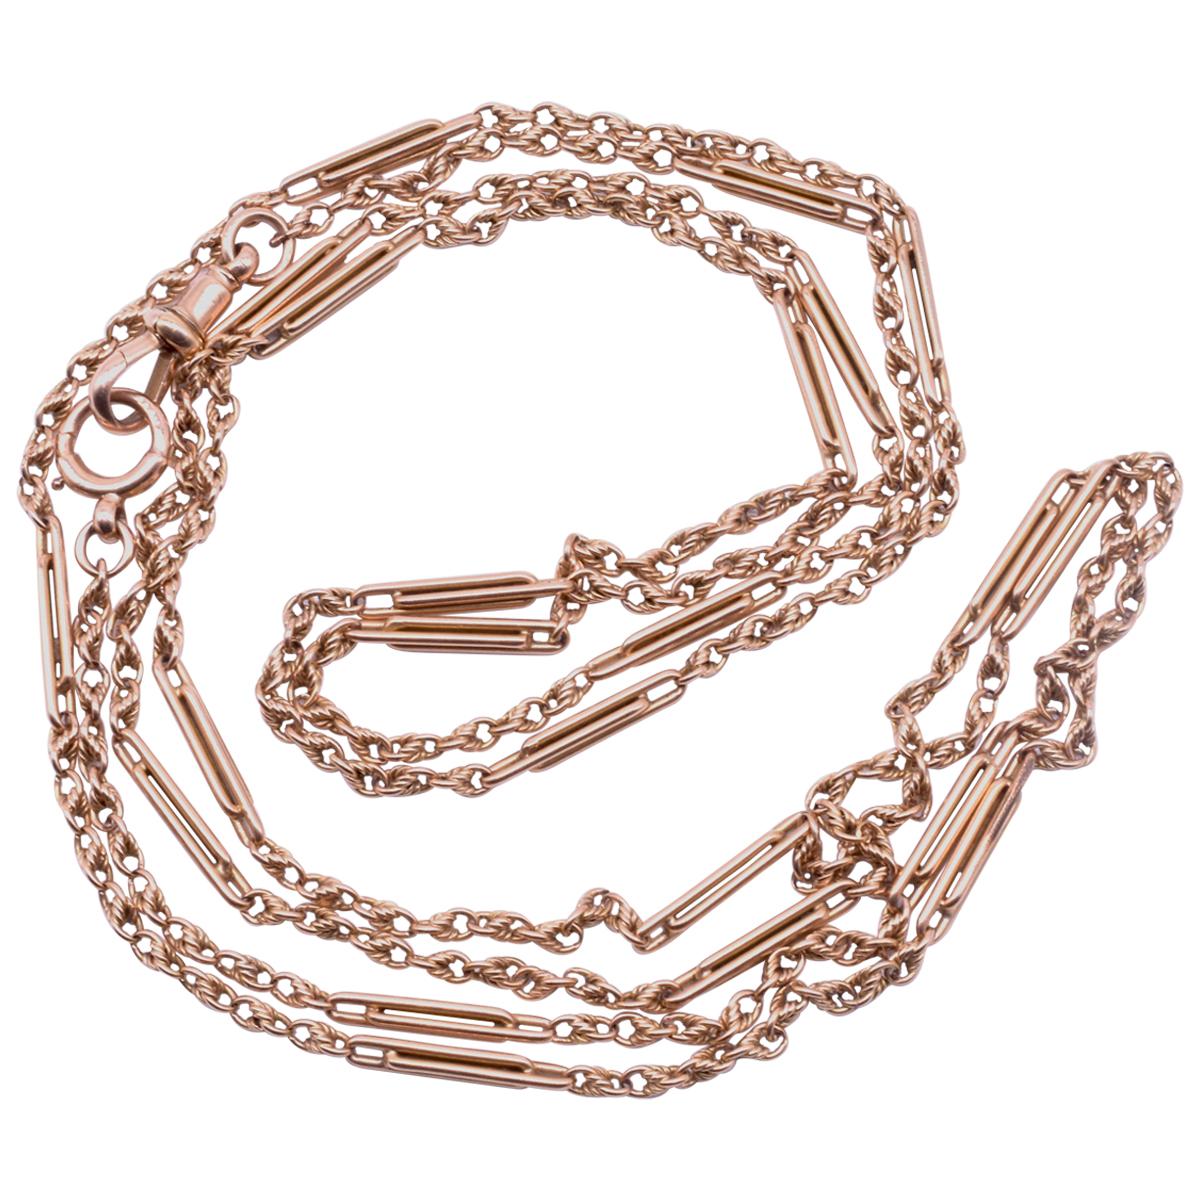 Double Fetter and Love Knot Link Chain, circa 1900